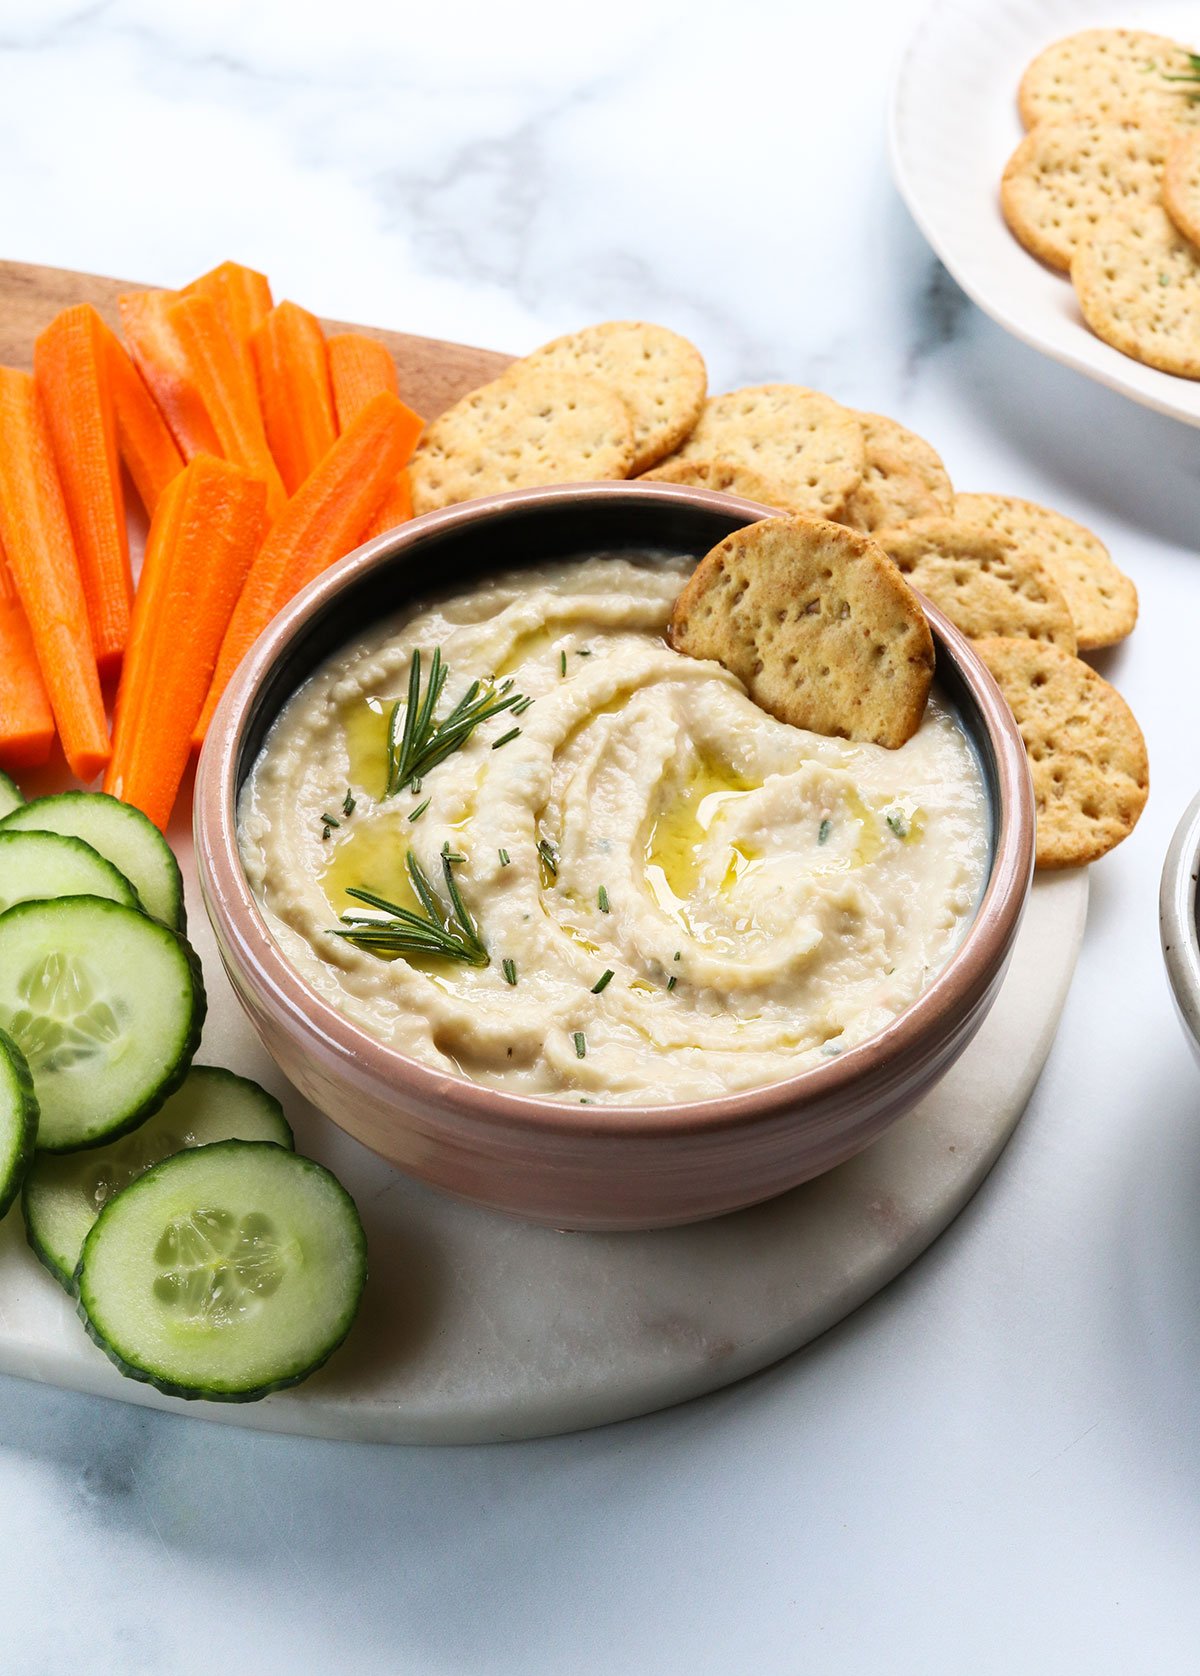 white bean dip served with crackers and sliced veggies on a platter.